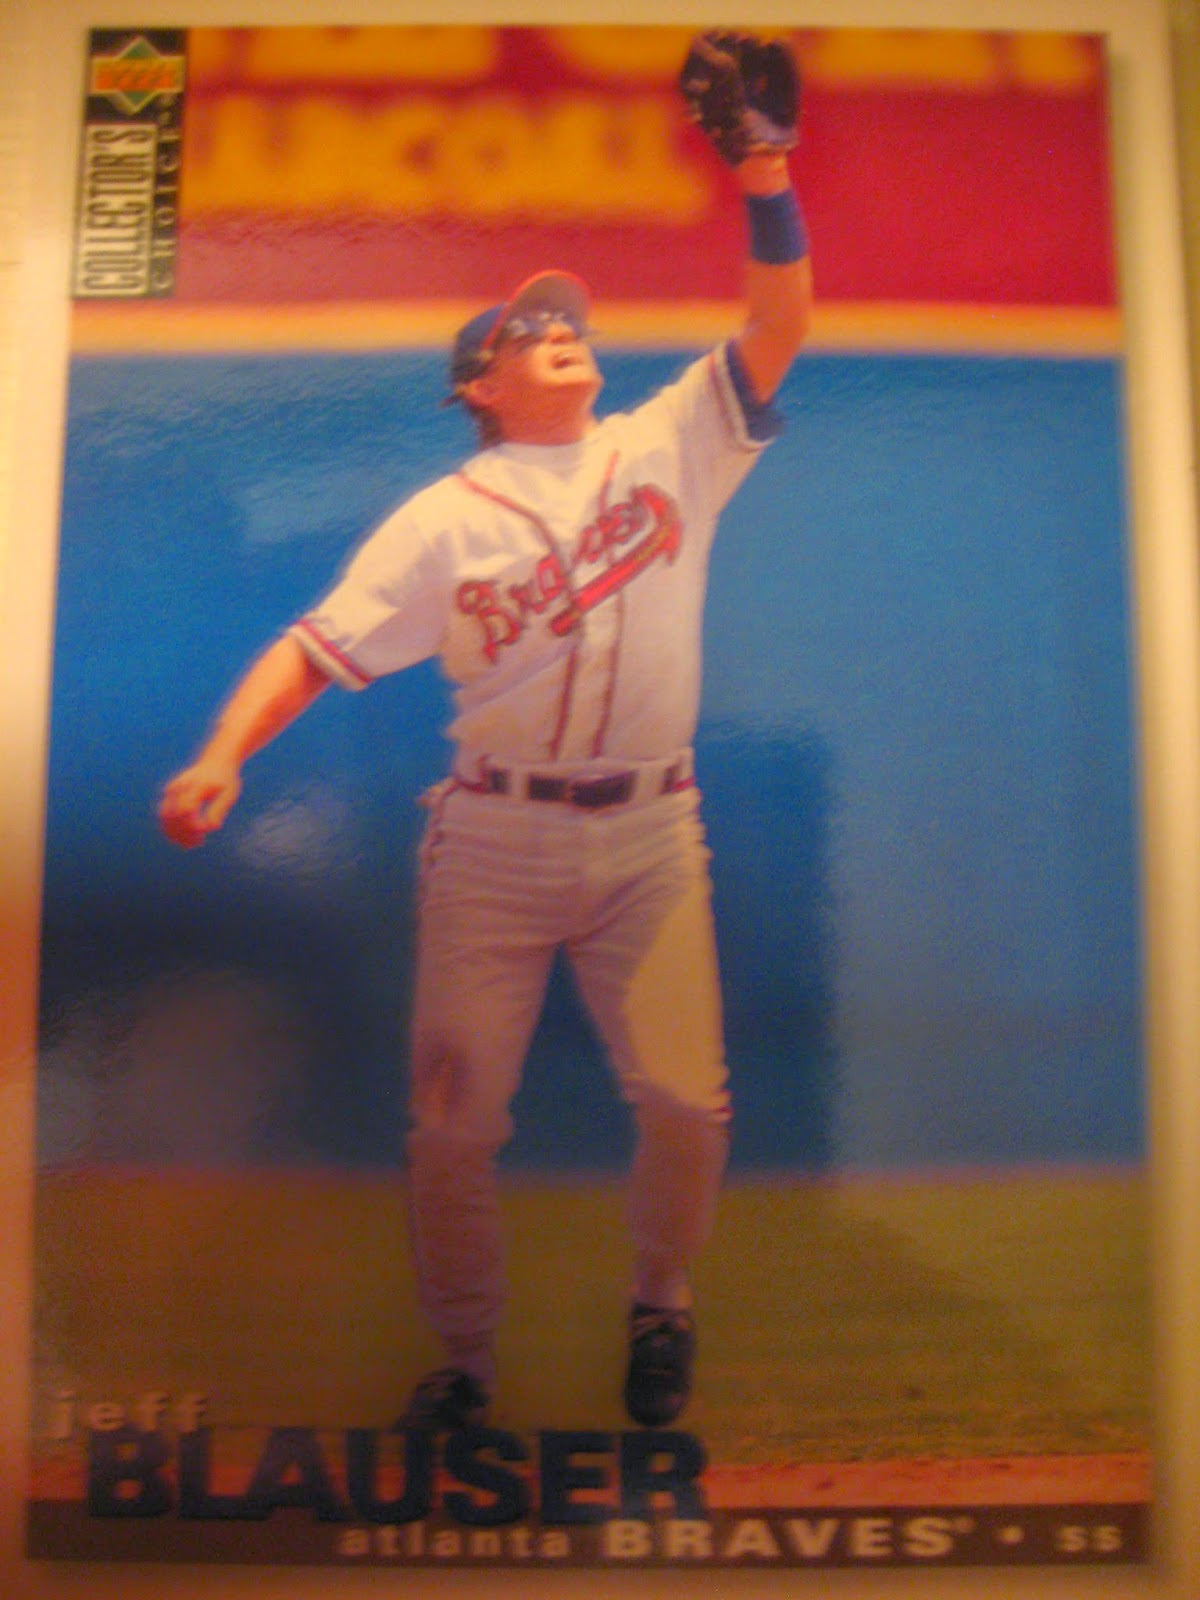 Baseball Cards Come to Life!: Player Profile: Jeff Blauser